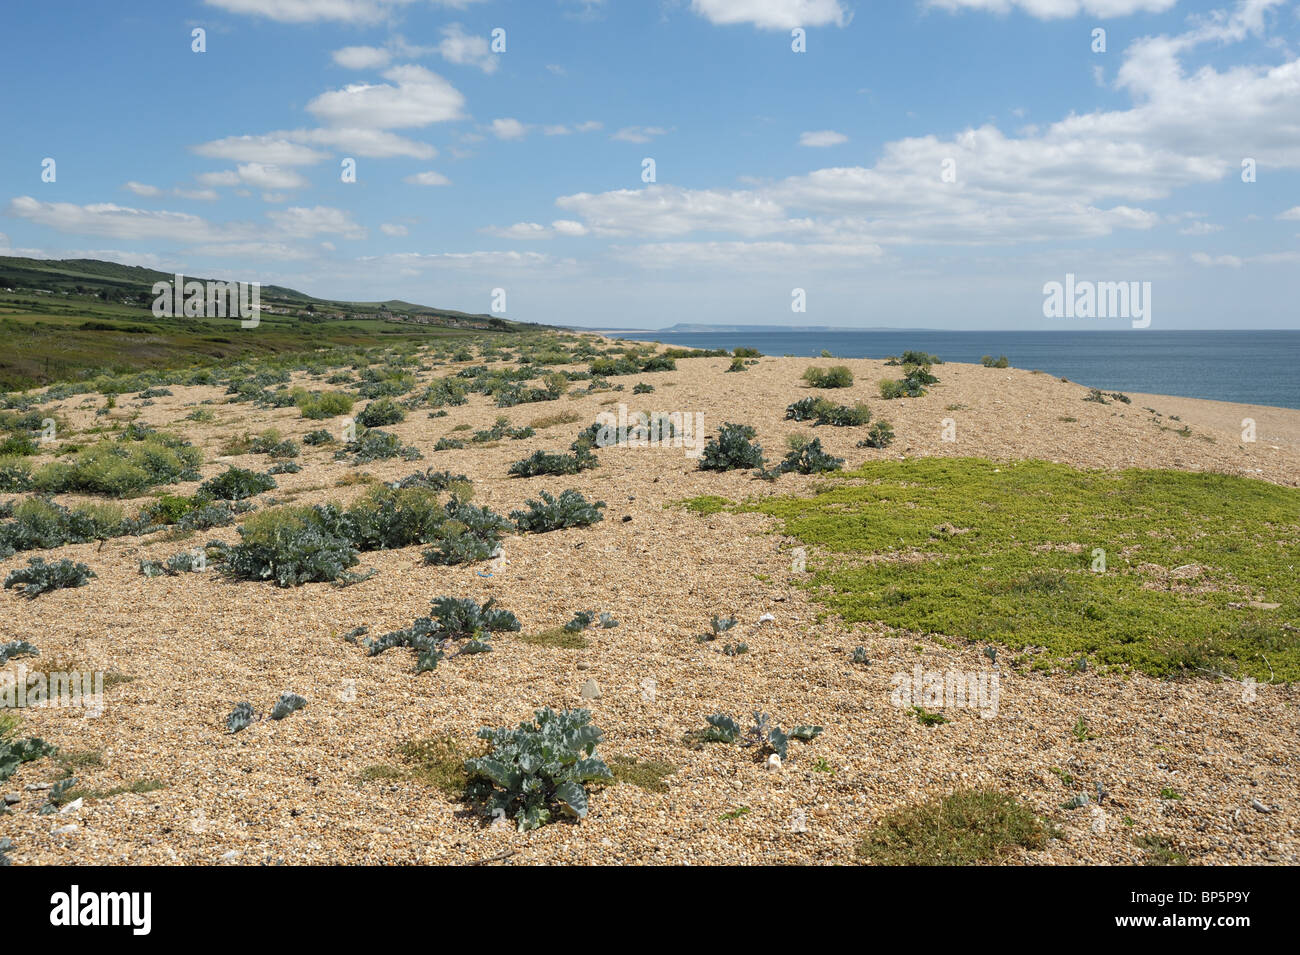 Sea kale and other vegetation growing in shingle on Chesil Beach, Dorset Stock Photo